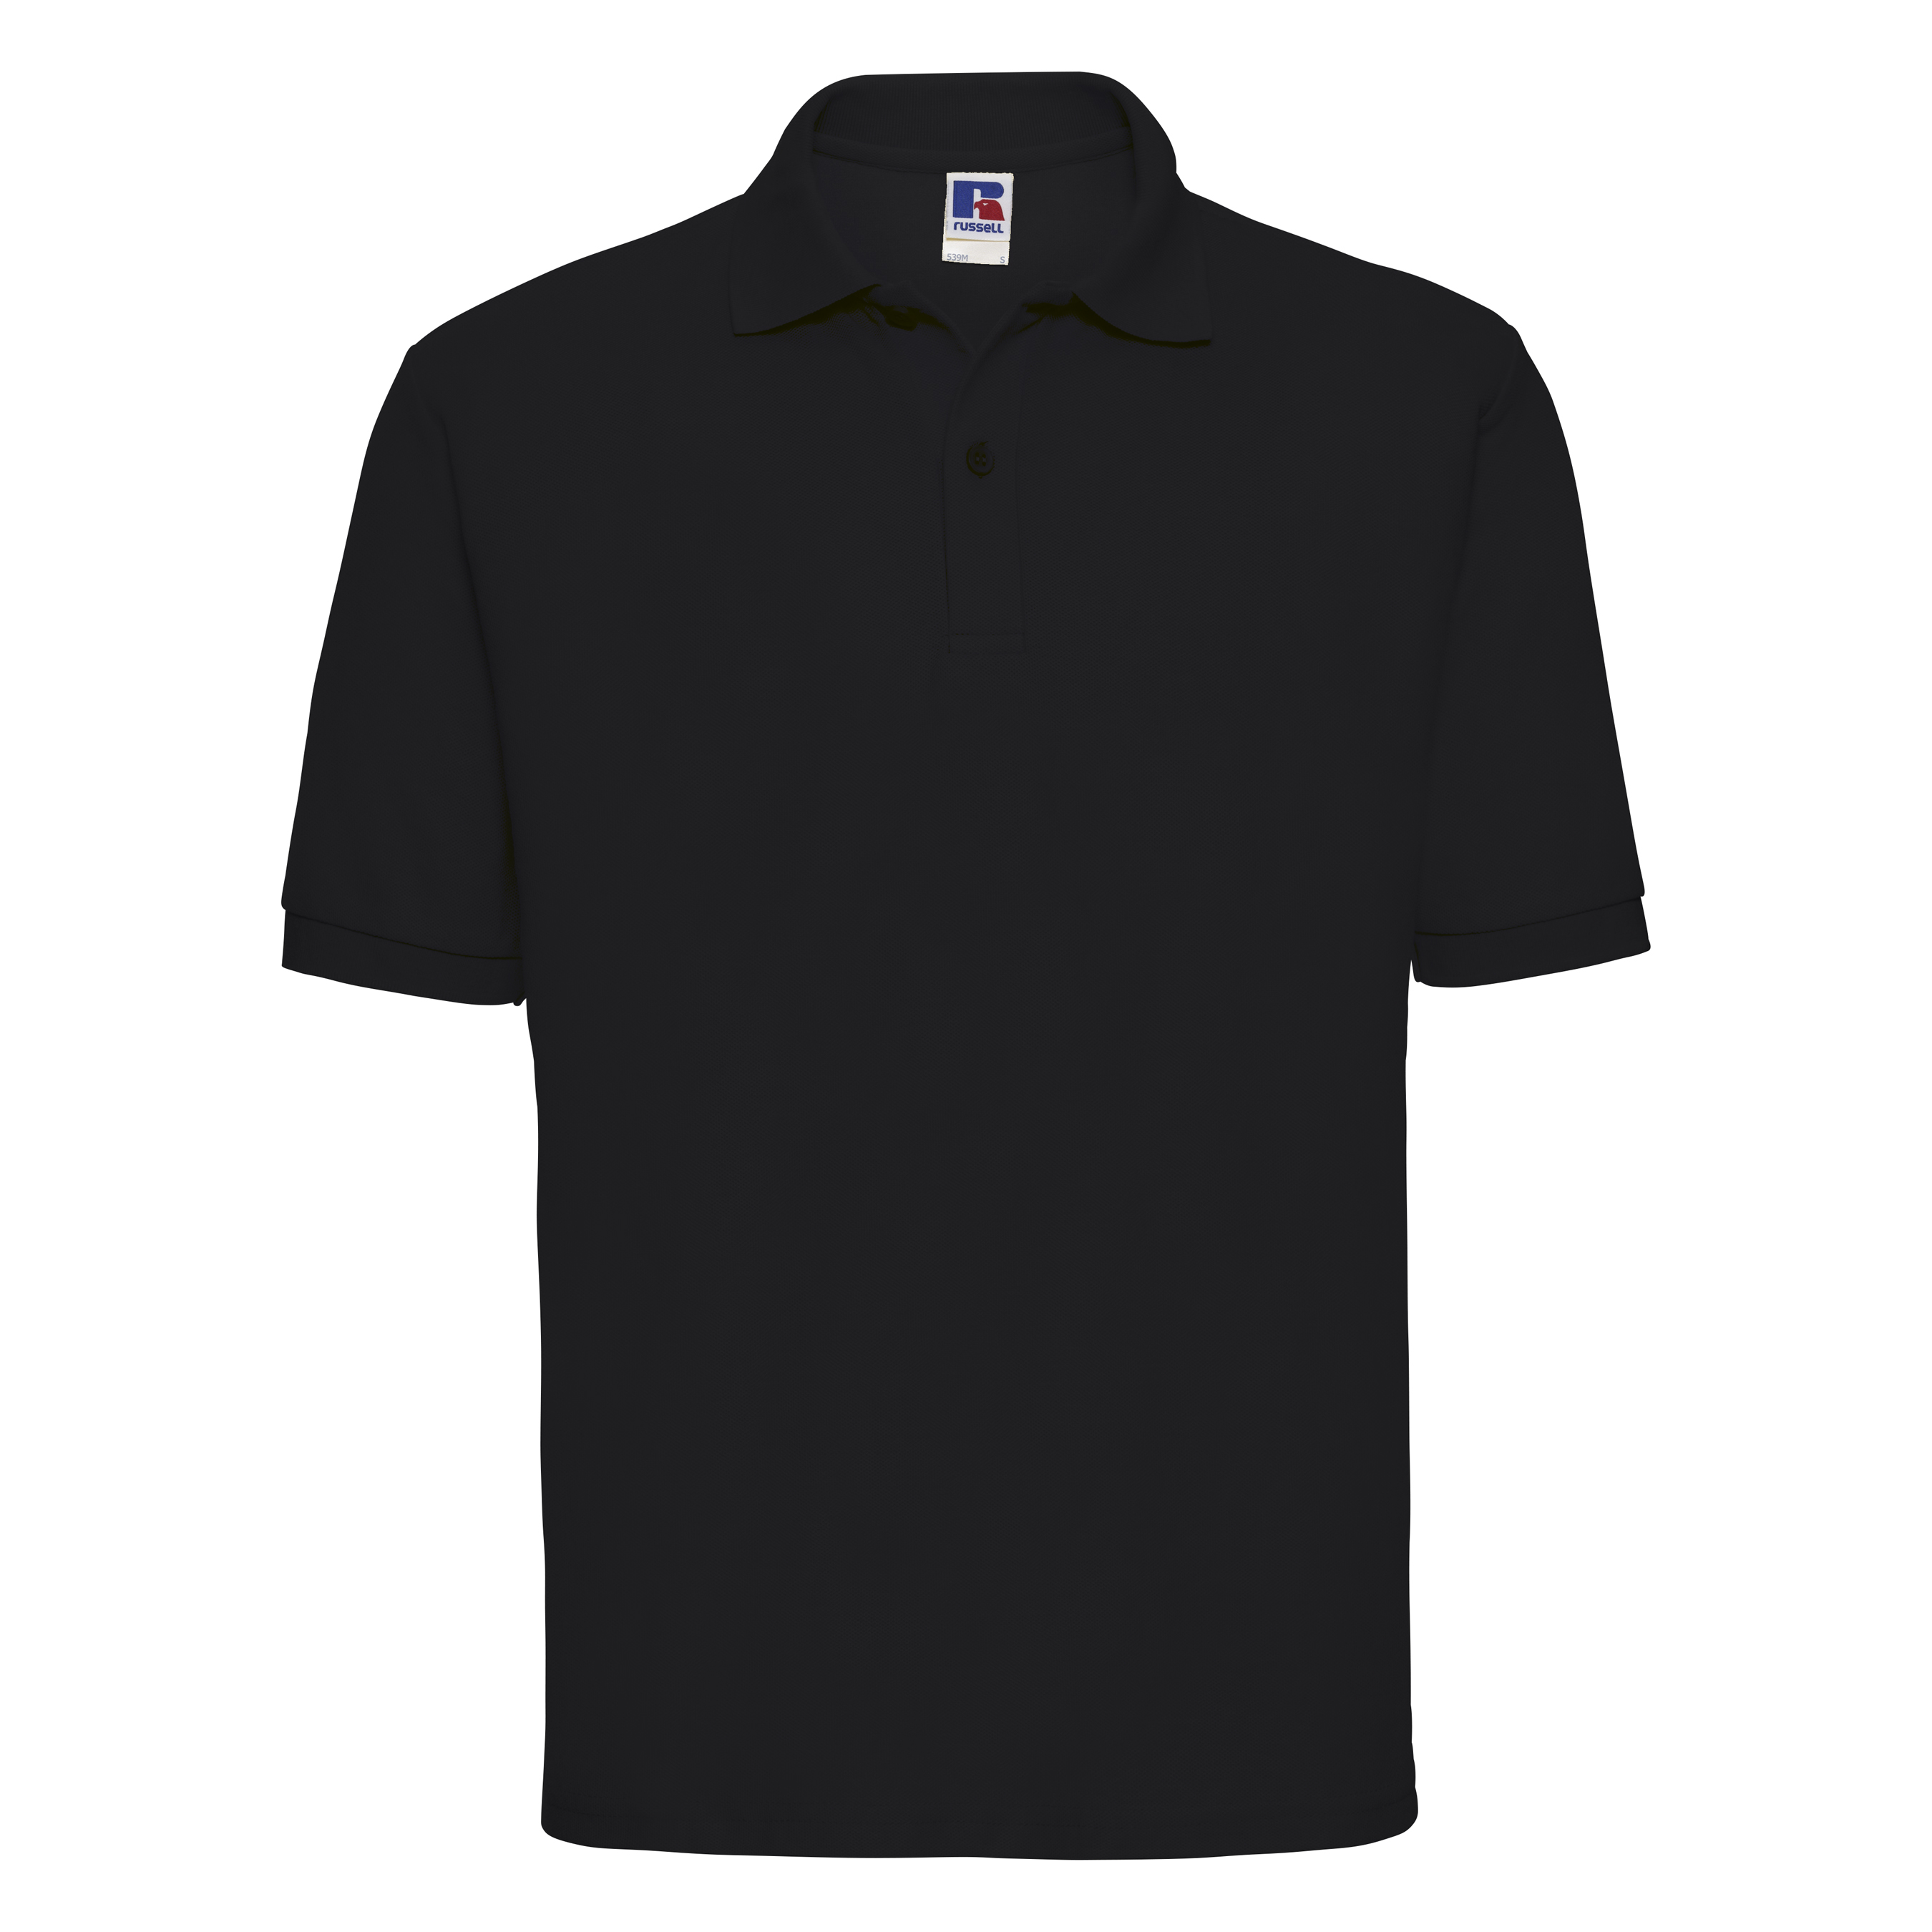 ax-httpswebsystems.s3.amazonaws.comtmp_for_downloadrussell-classic-polycotton-polo-black.jpg